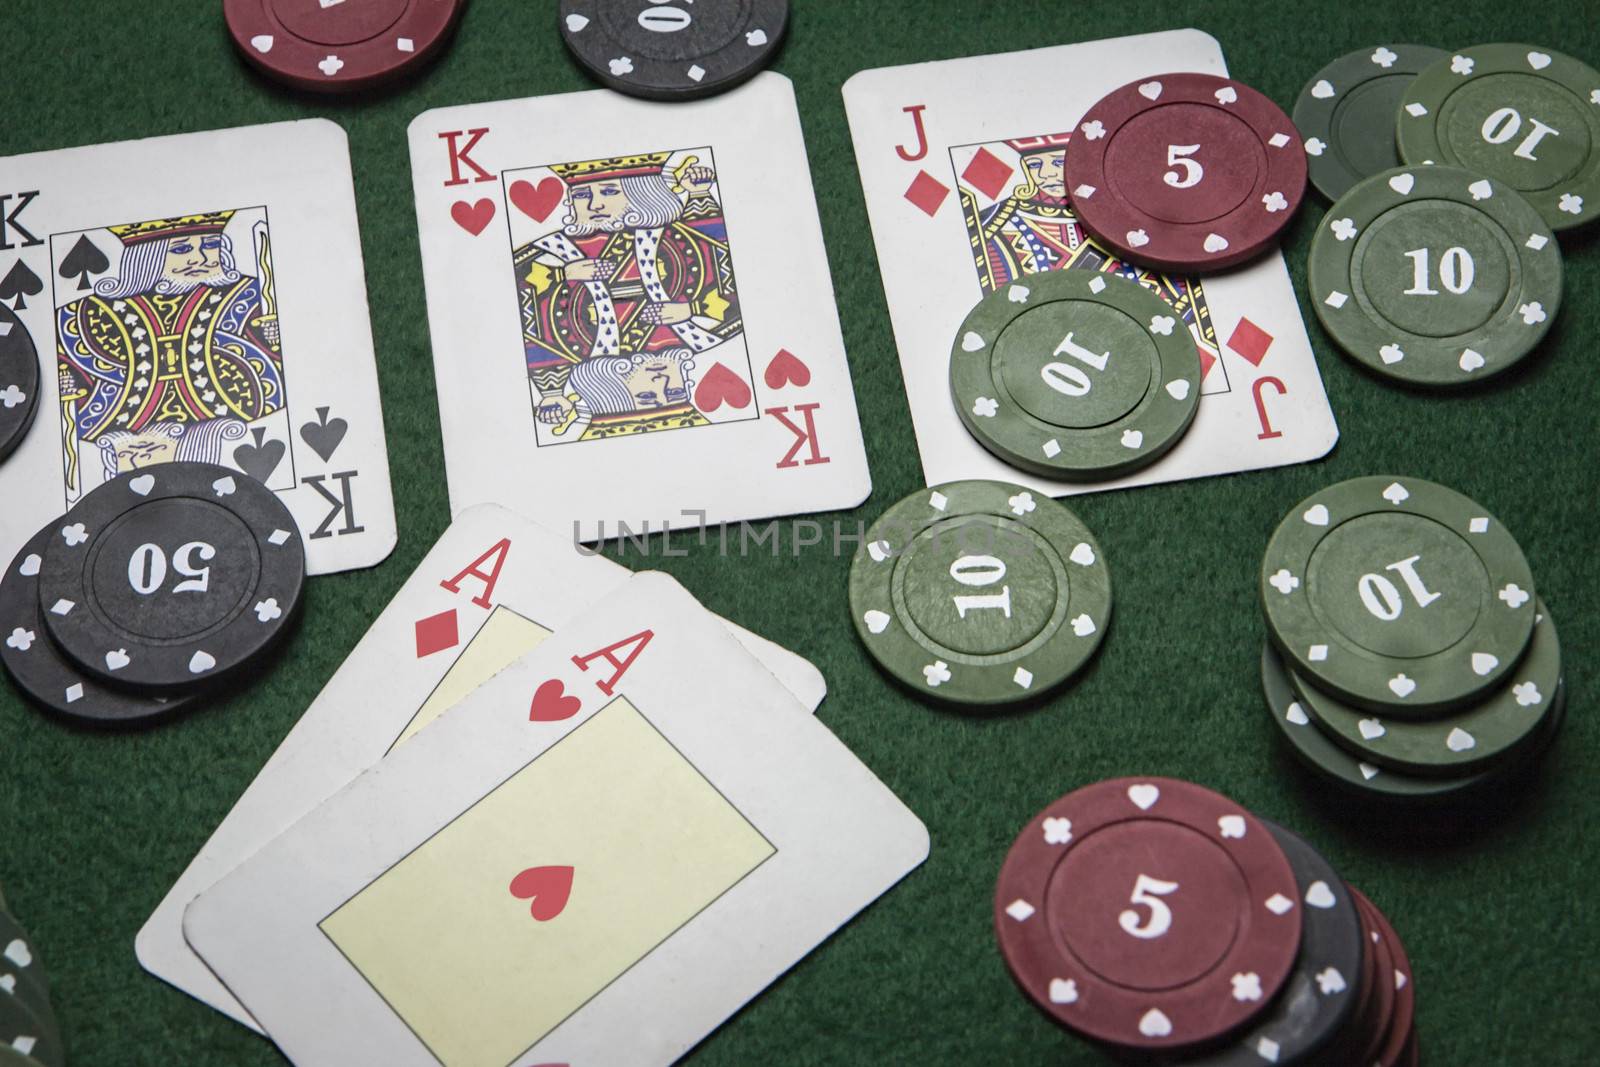 cards poker deck English, poker chips stack on green table 